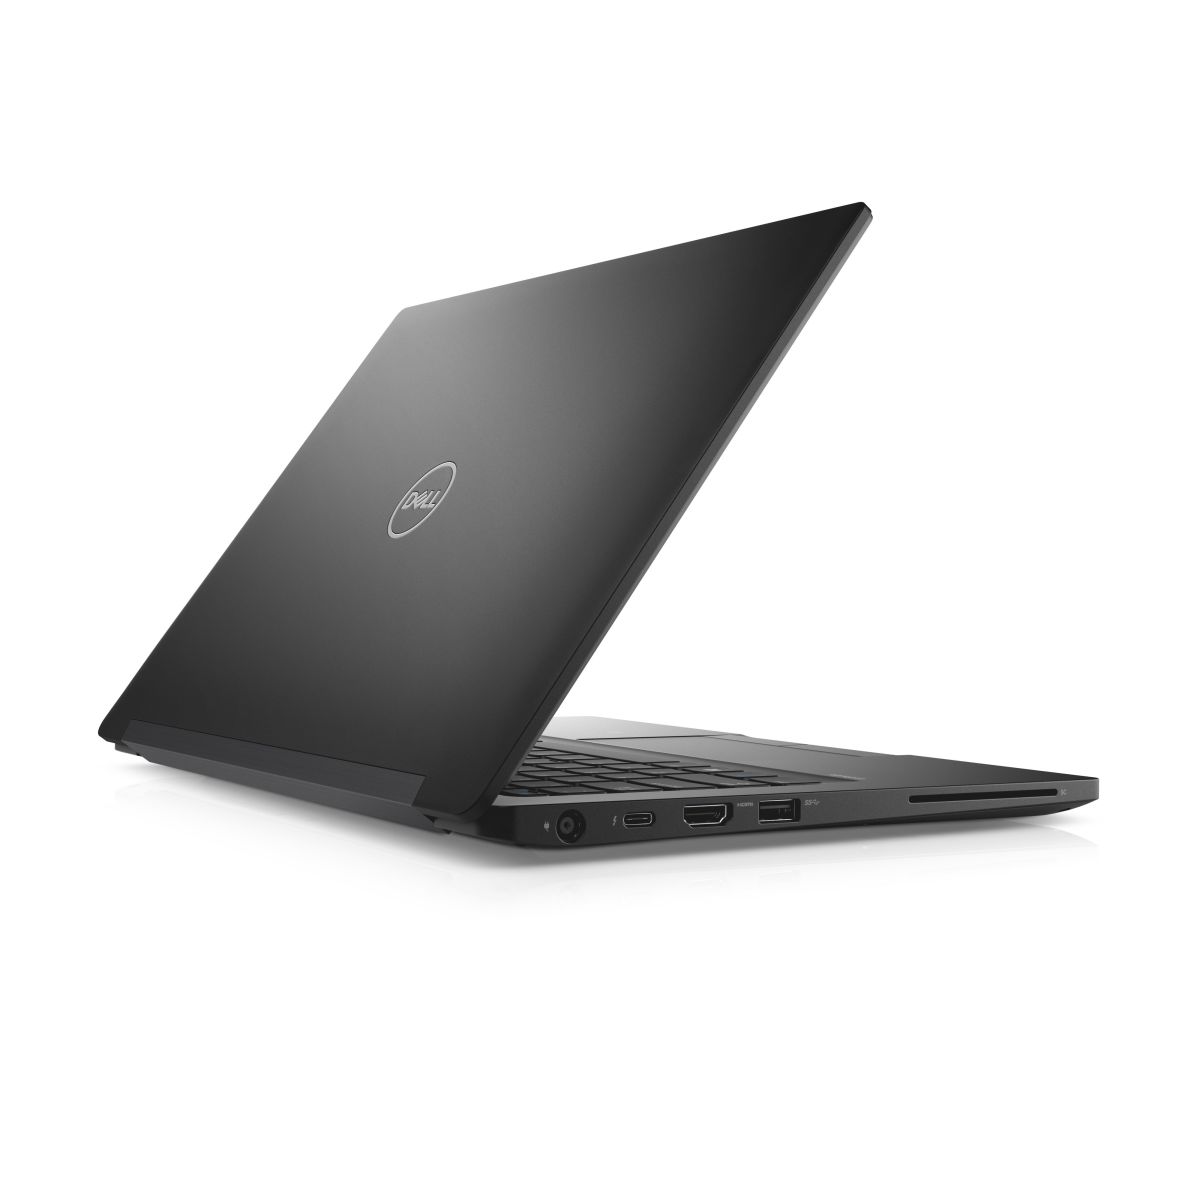 Dell Latitude C Family Model Ppx Drivers